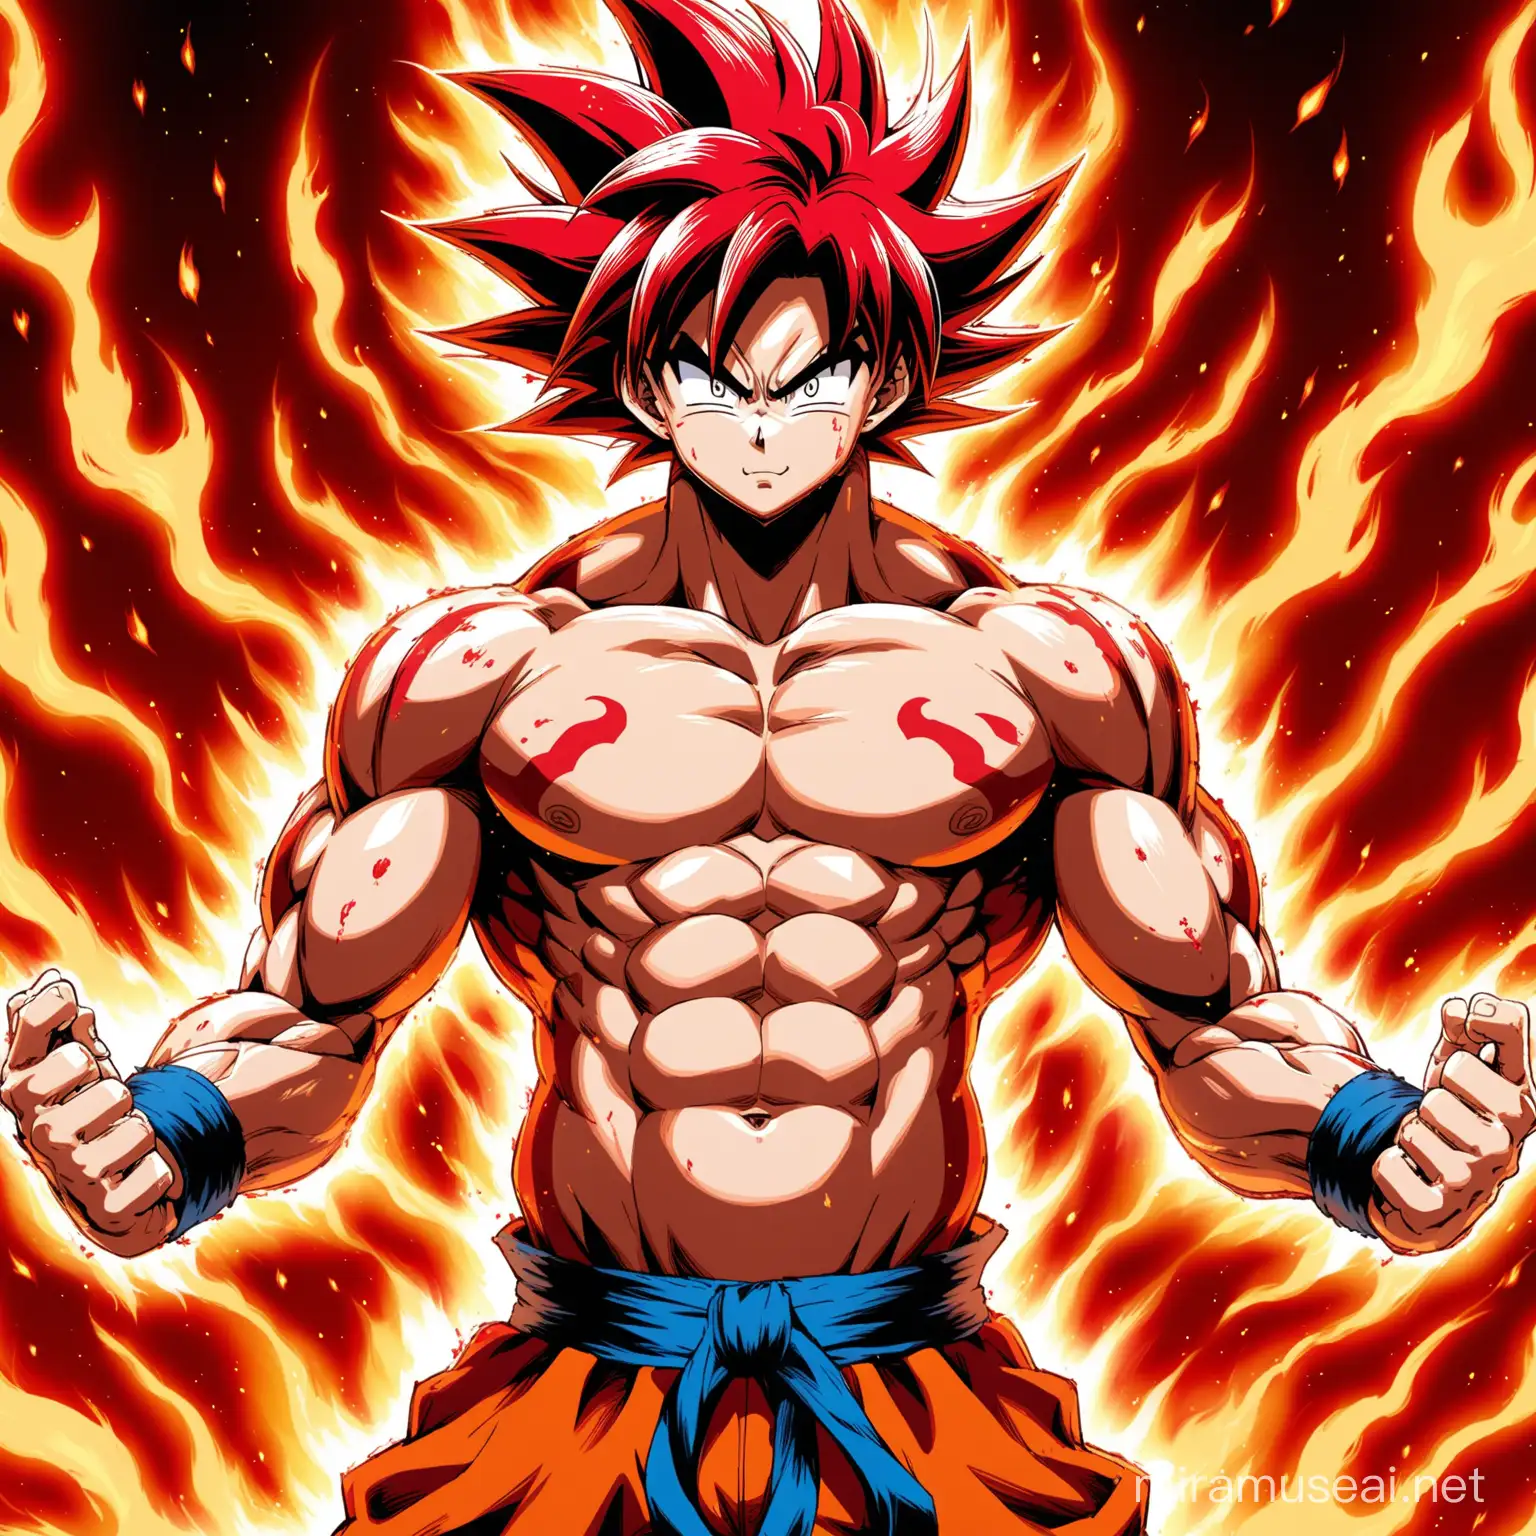 Muscular Goku Unleashes Fiery RedWhite Transformation with Cross Backdrop